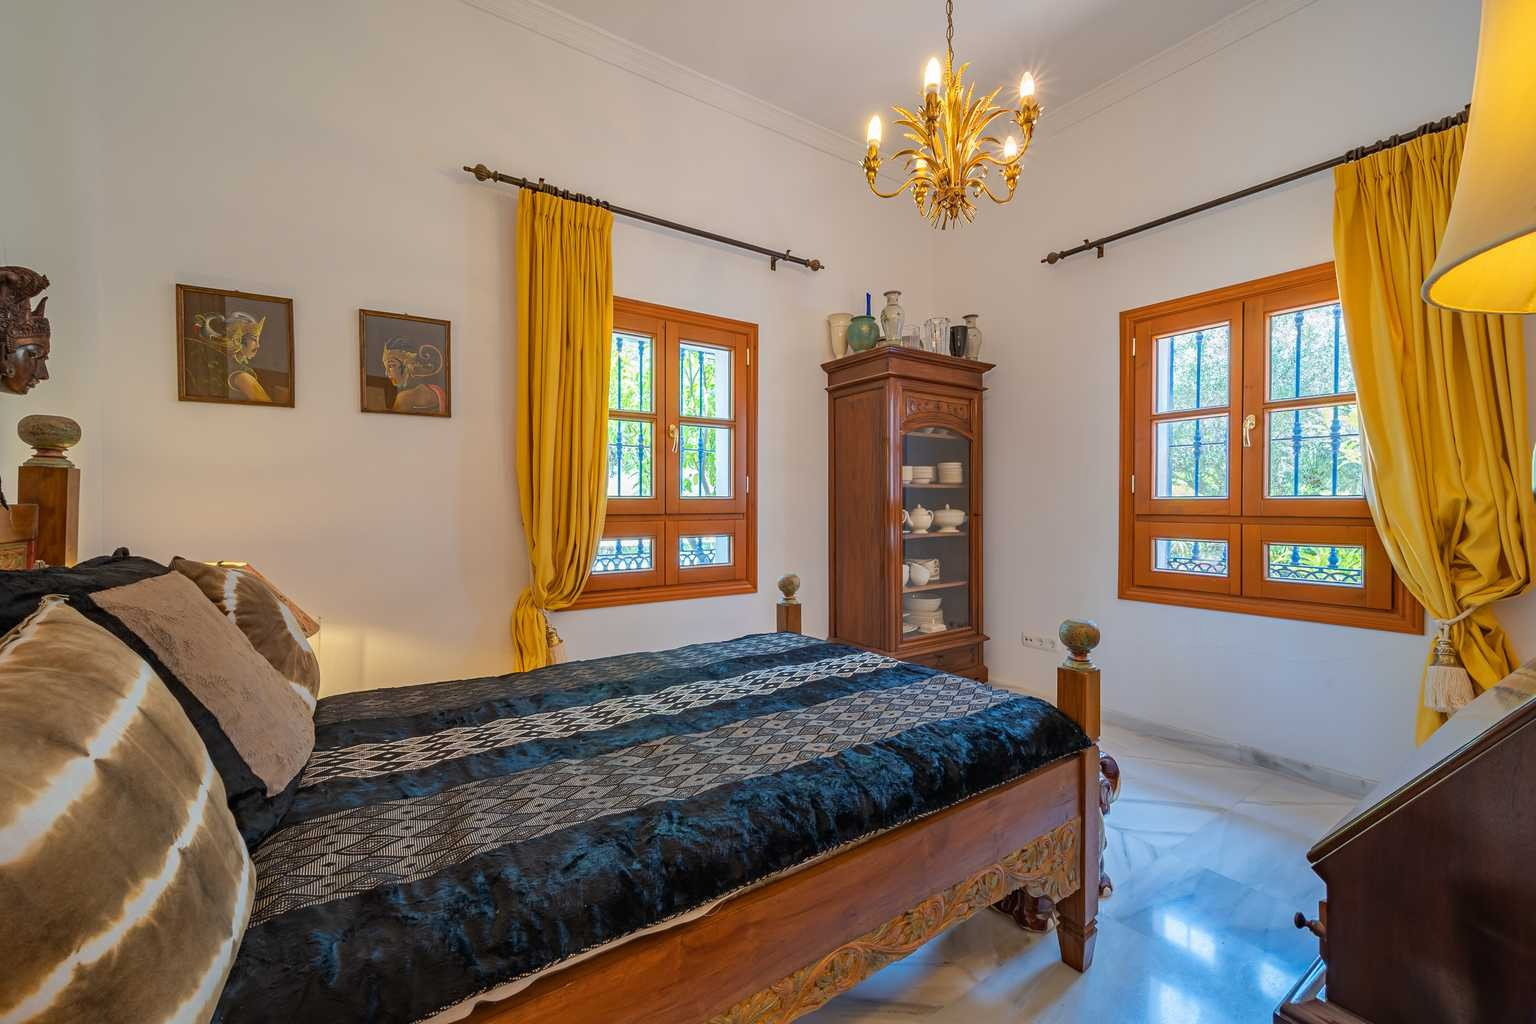 Rustic and well-kept villa located in Monte Mayor, a beautiful residential estate within the Ronda mountains